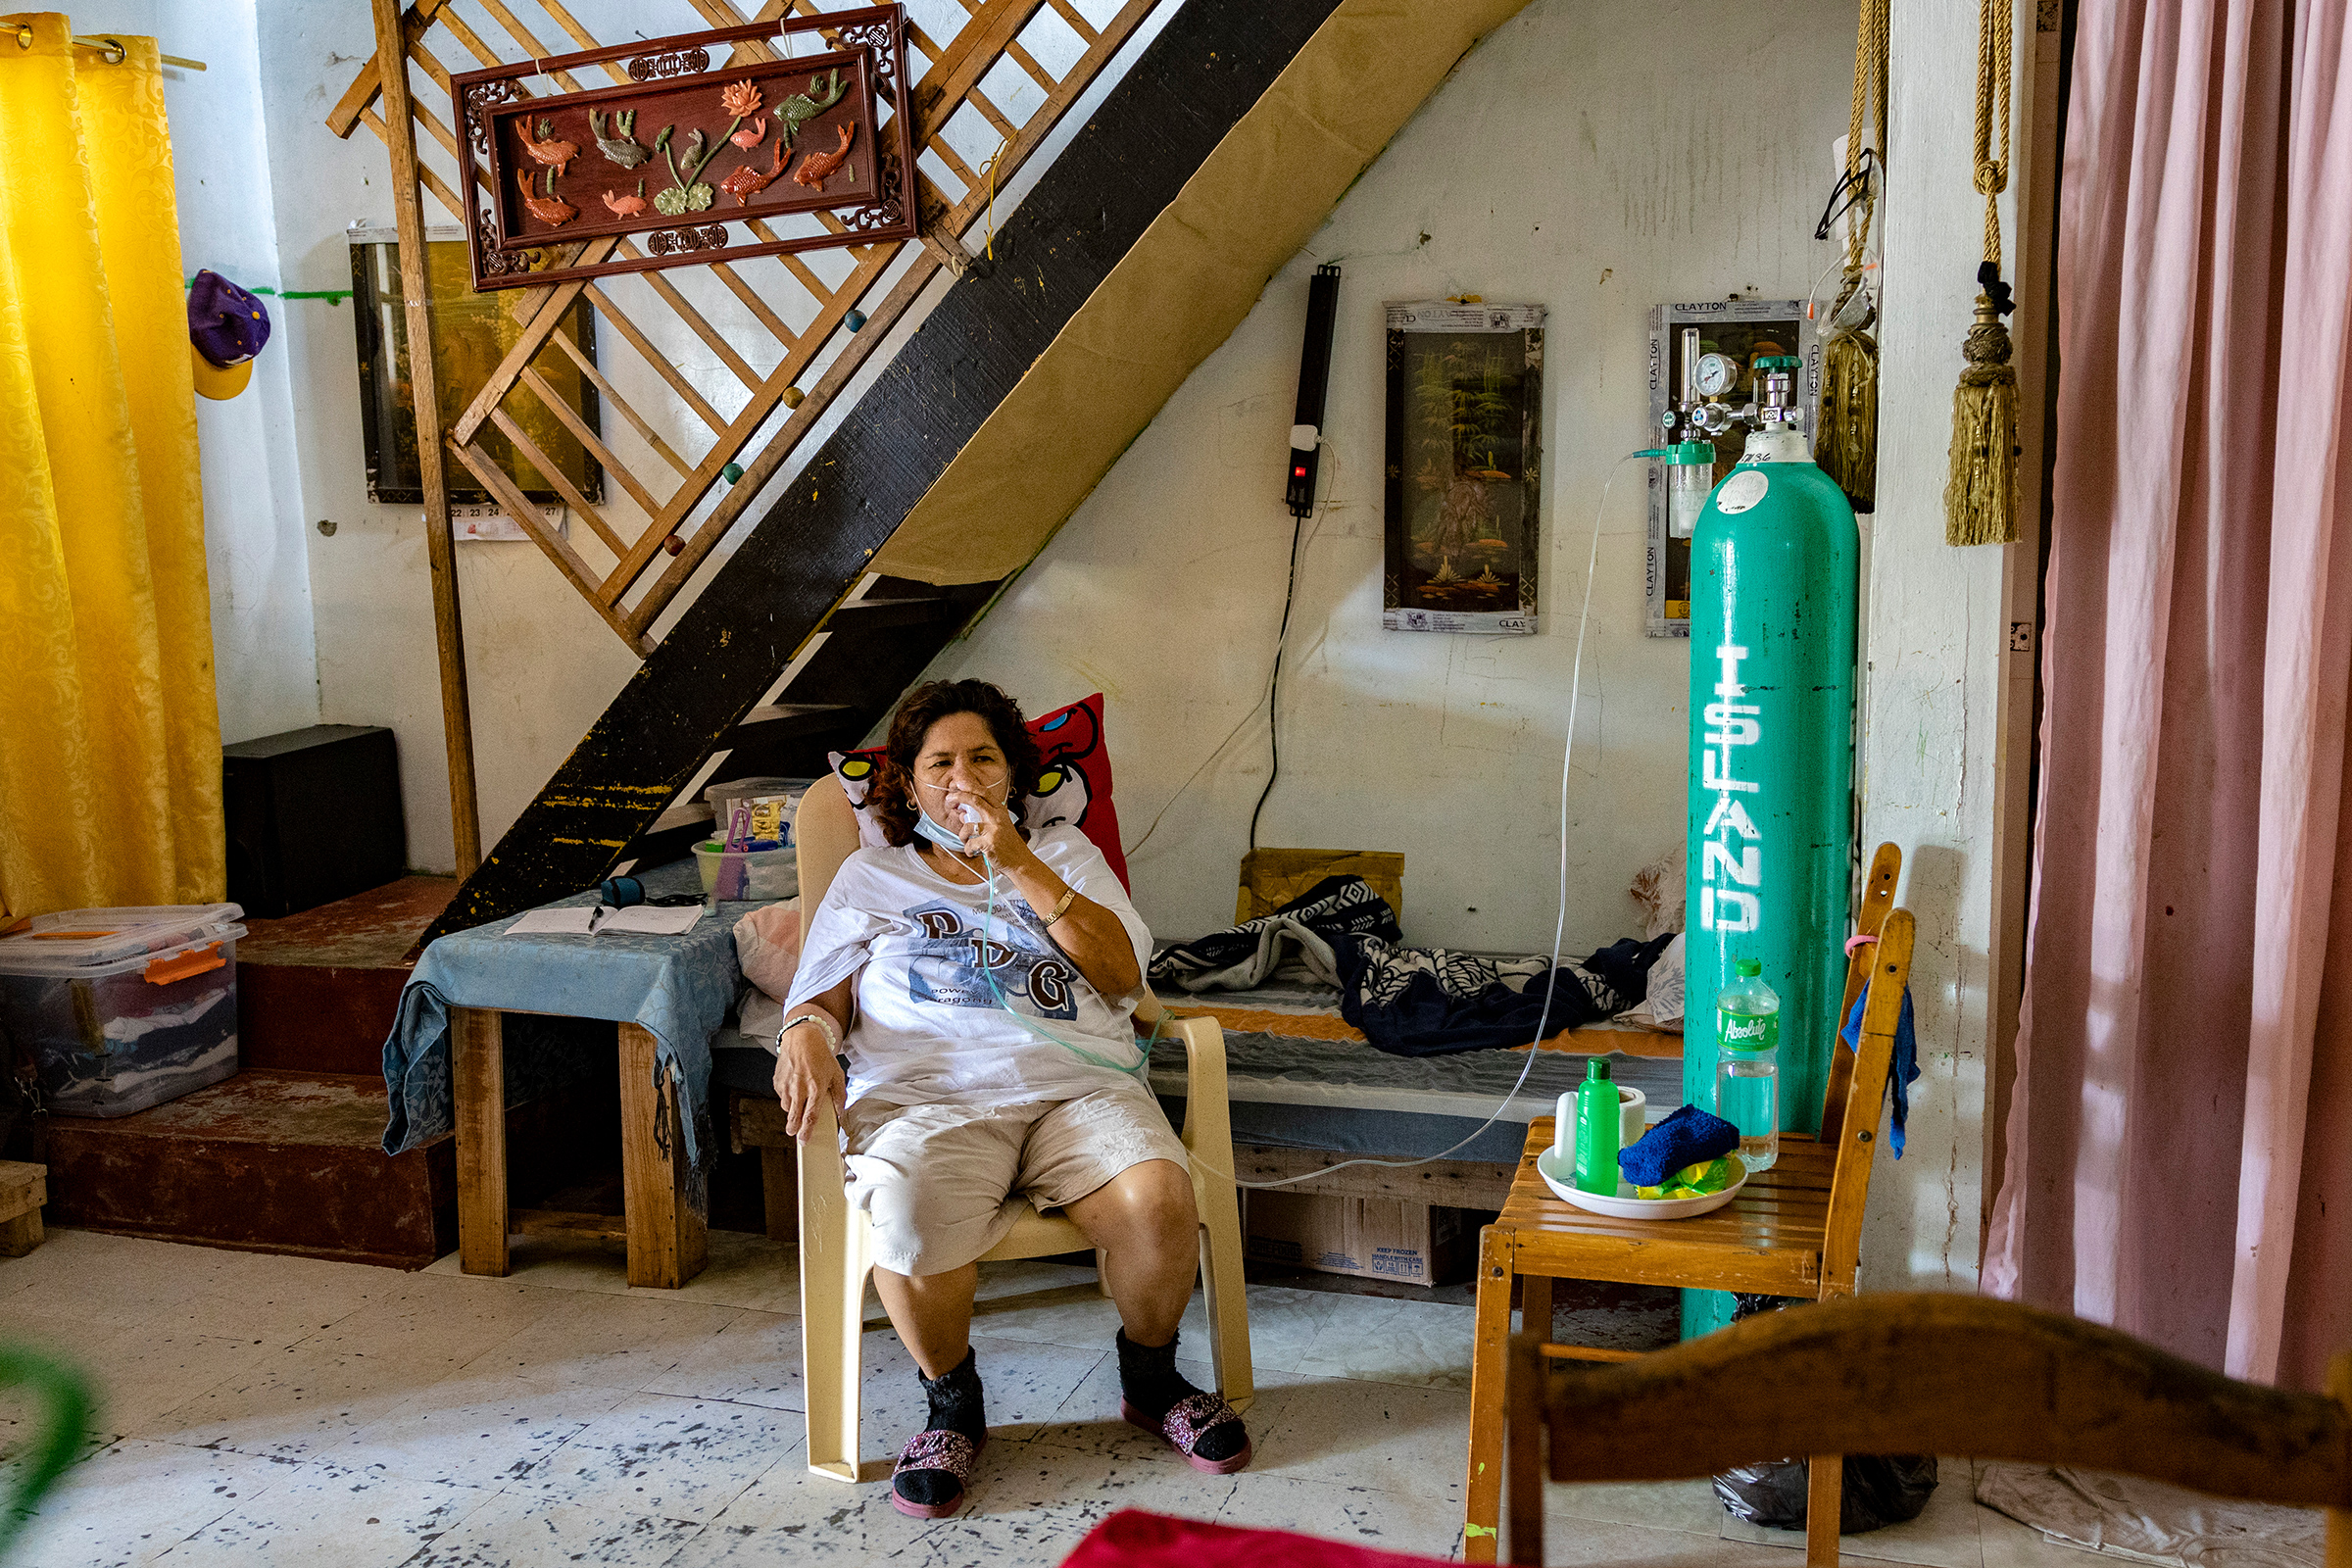 Violeta Bahit, who has COVID-19, breathes with the assistance of an oxygen tank in her home in Lipa, in the province of Batangas, Philippines, on April 9, 2021. (Ezra Acayan—Getty Images)